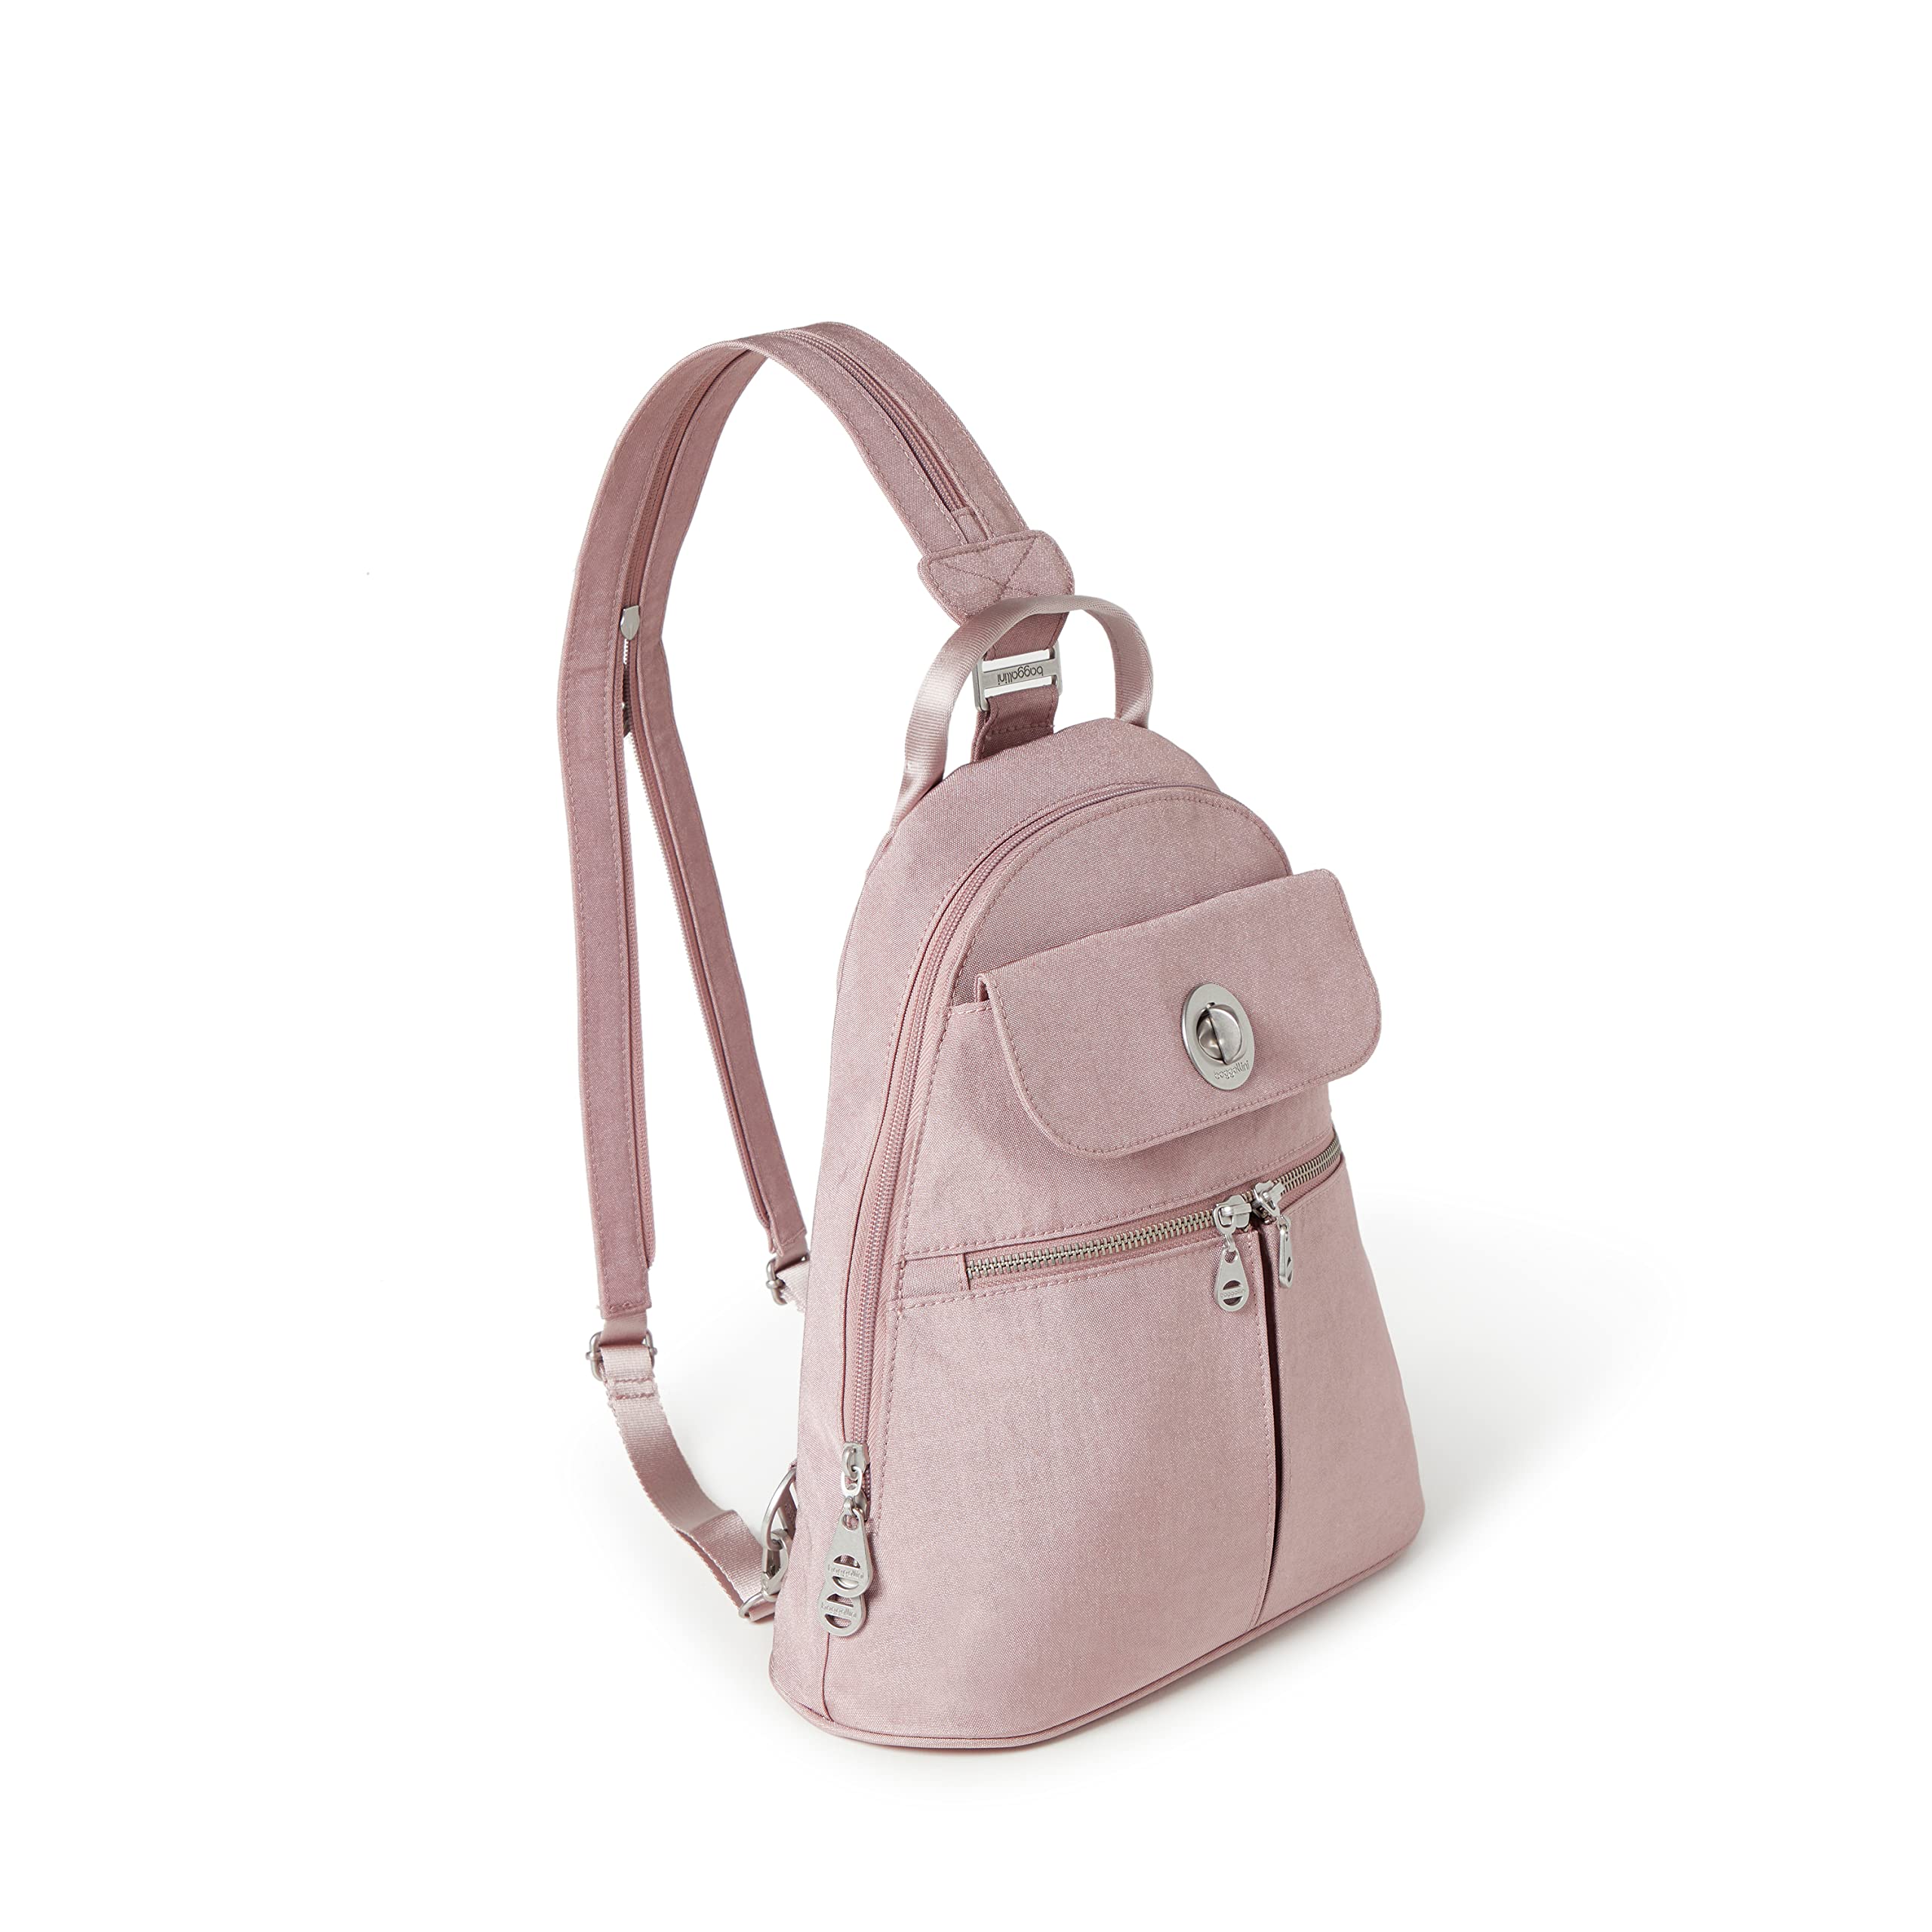 Baggallini womens Naples convertible backpack, Blush Shimmer, One Size US